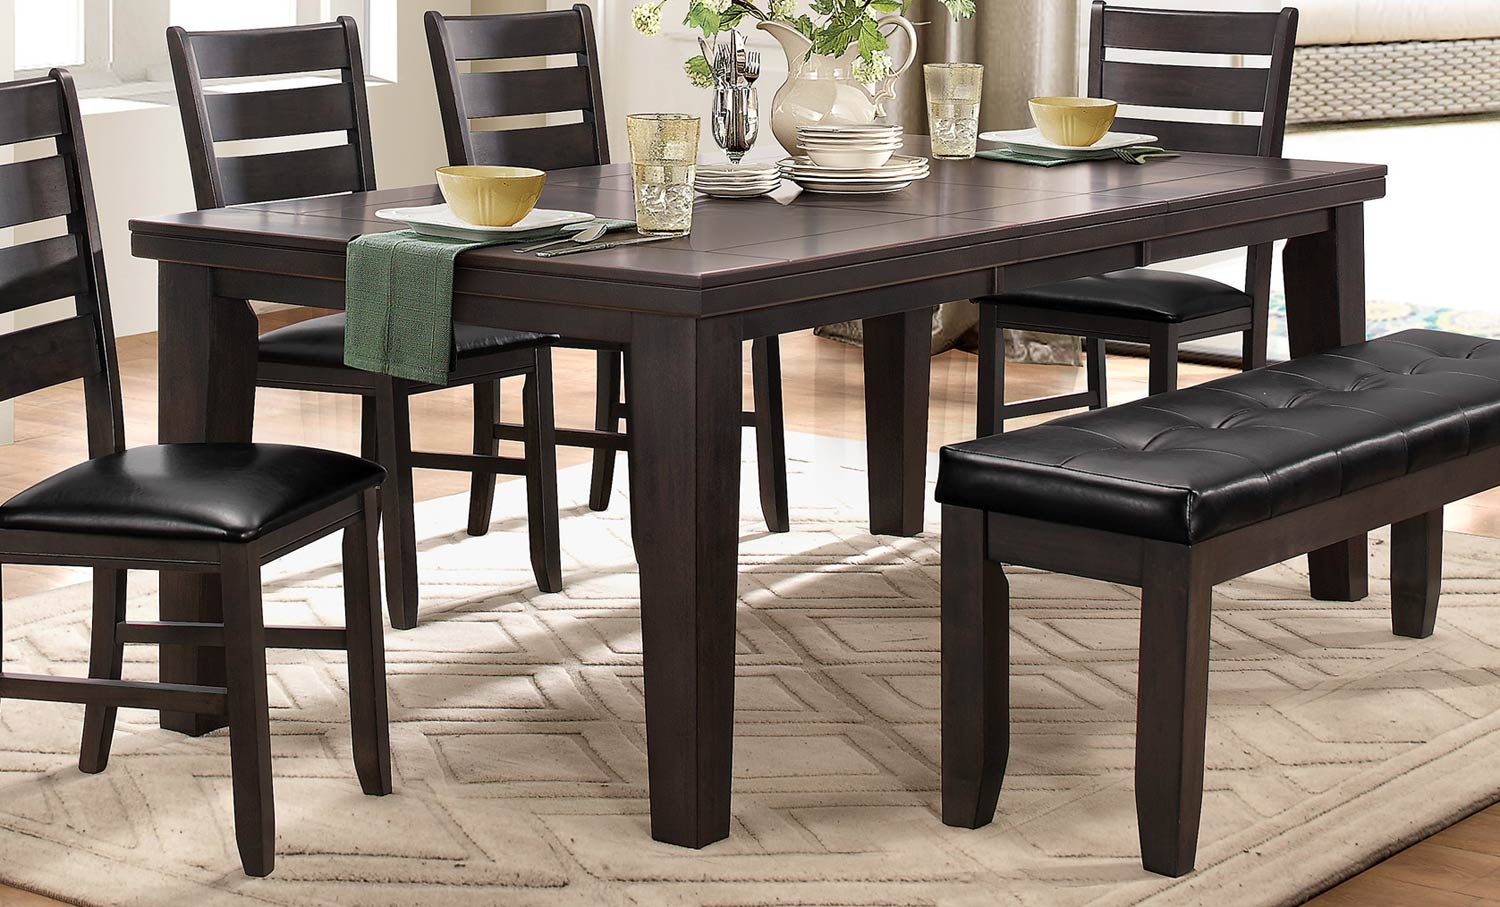 Homelegance Ameillia Dining Table - Grey/Brown